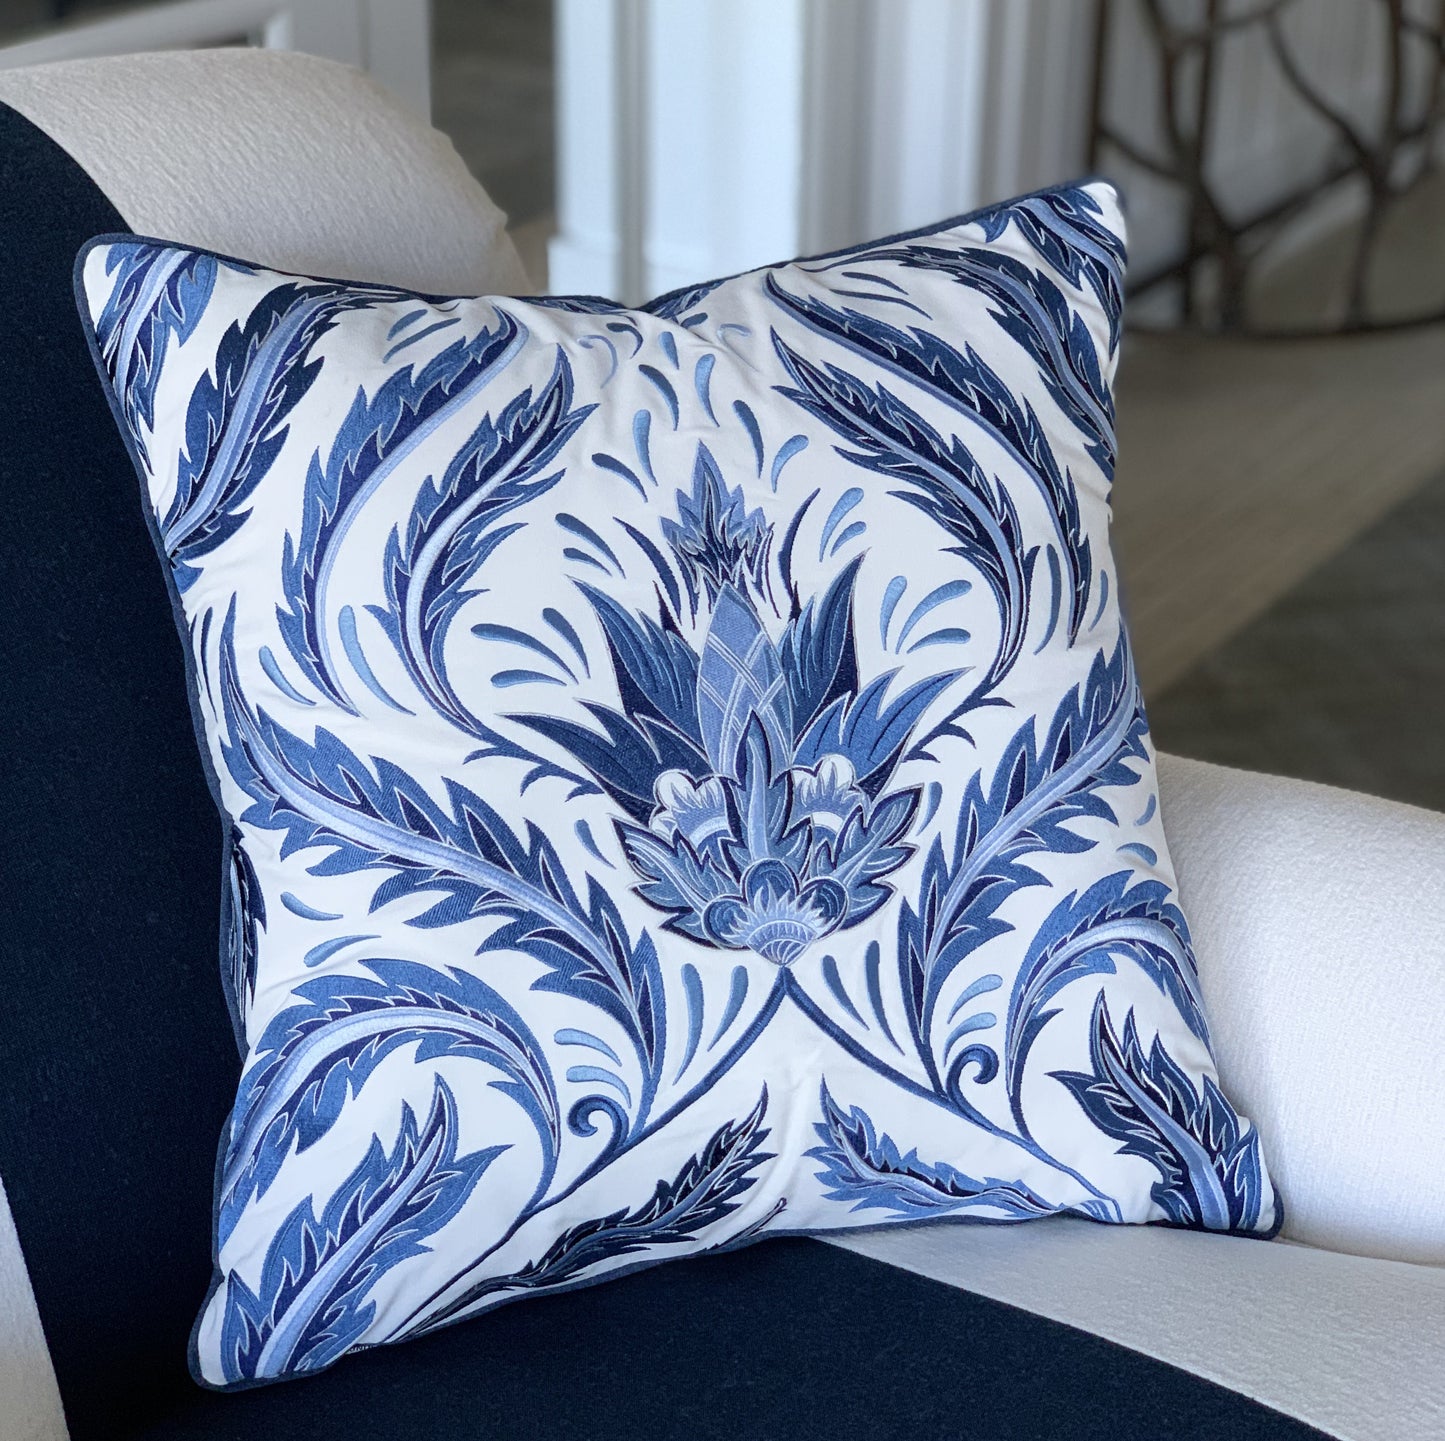 Indigo Morrie Thistle pillow styled on a chair.